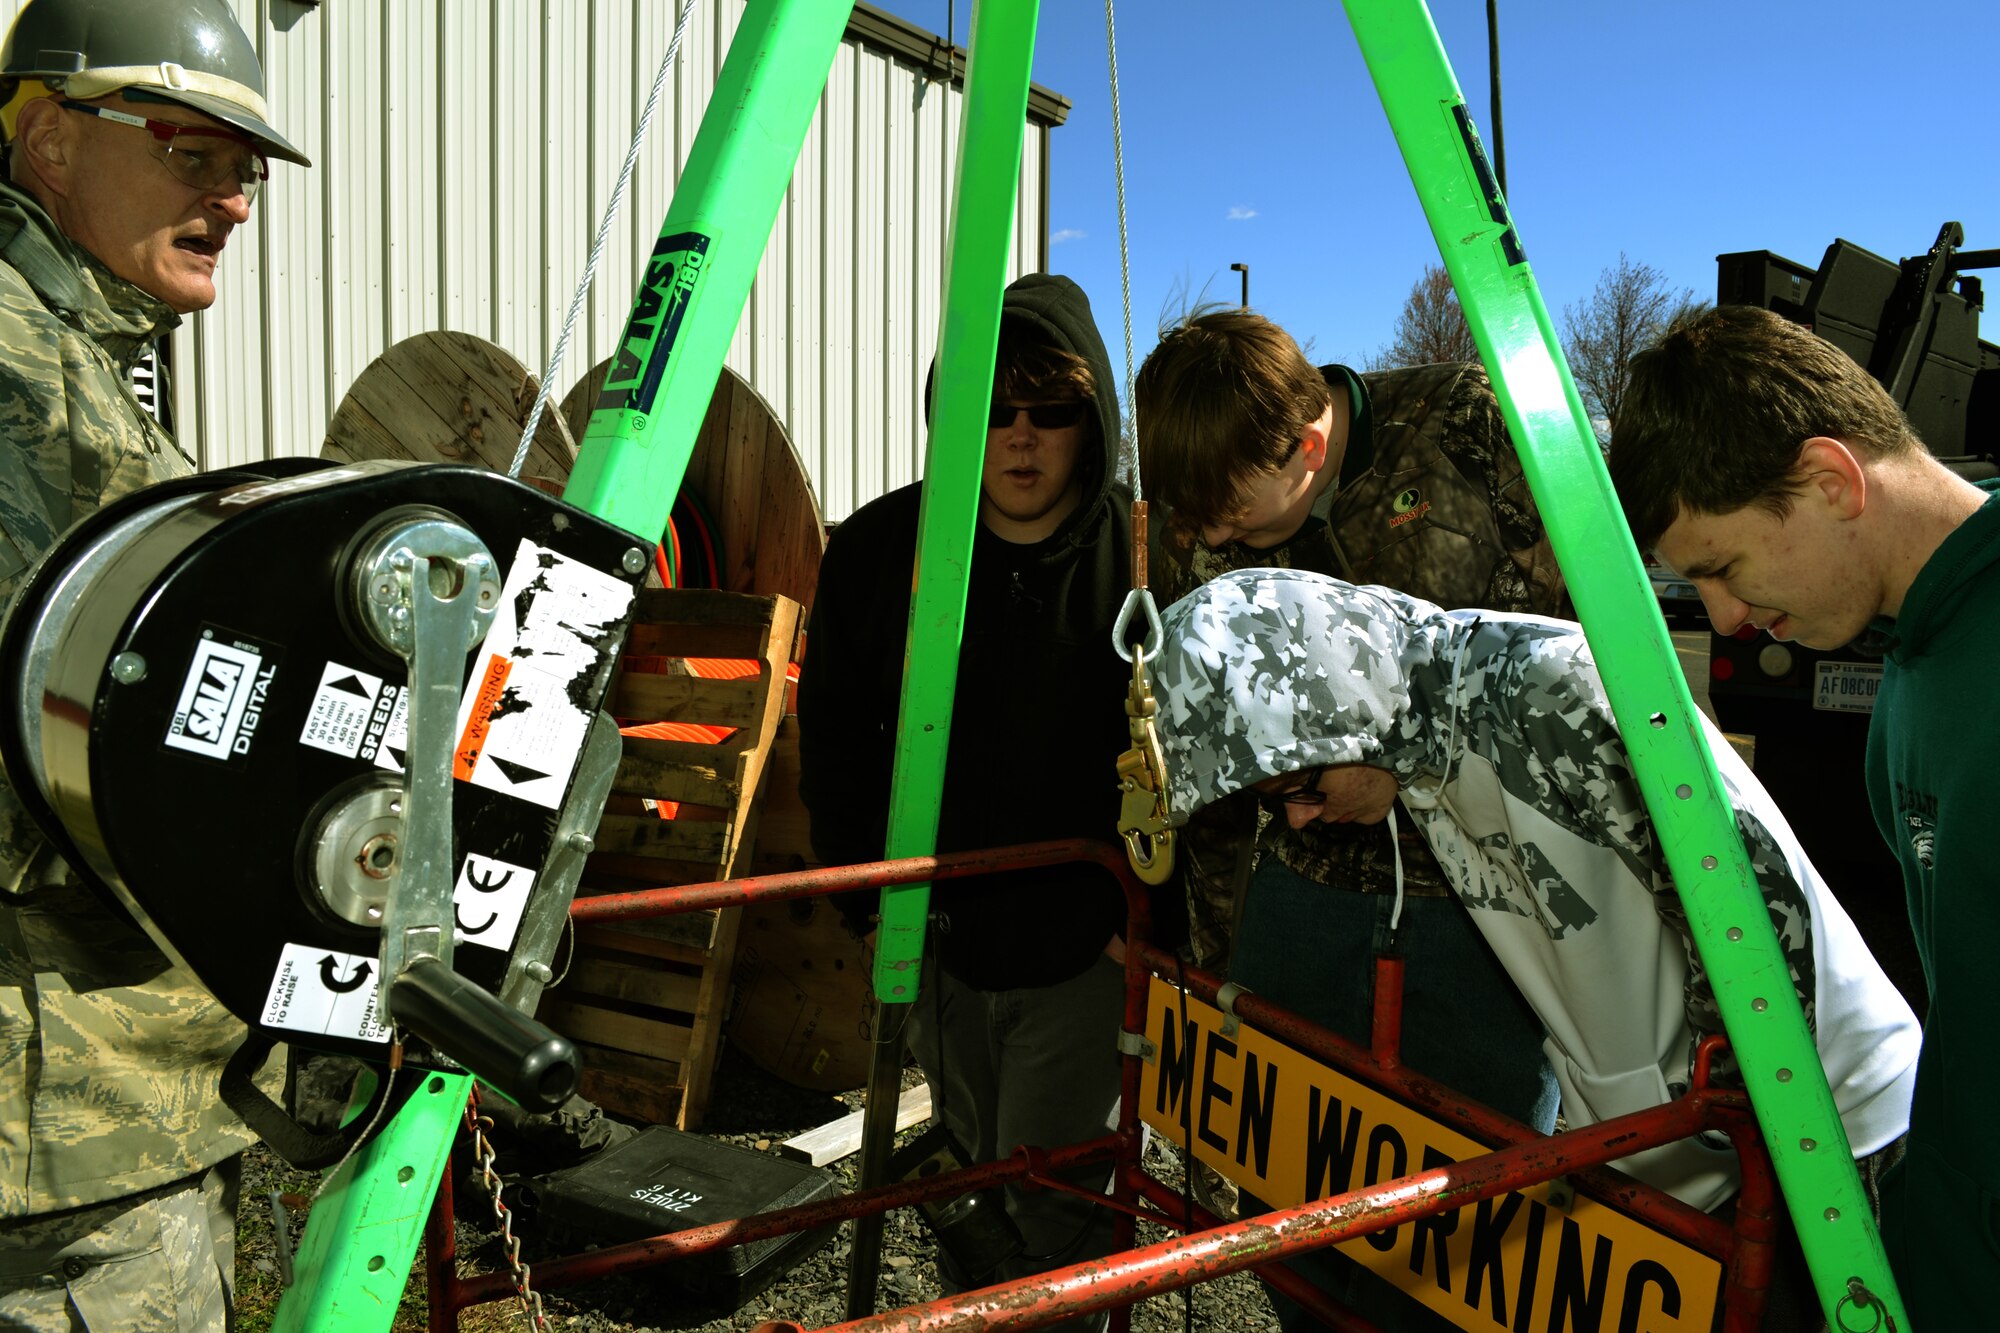 Staff Sgt. Frederick Becker, of the 270th Engineering Installation Squadron with the Pa. Air National Guard, explains safety procedures at permit-required confined spaces -- like a utility hole -- to a group of students from the Career Institute of Technology, Easton, Pa., during a school tour at Horsham Air Guard Station, Pa., March 18, 2016. The students were given a tour by the 111th Attack Wing recruiters throughout a RED HORSE, Det. 1 hangar and the 270th EIS. (U.S. Air National Guard photo by Tech. Sgt. Andria Allmond)